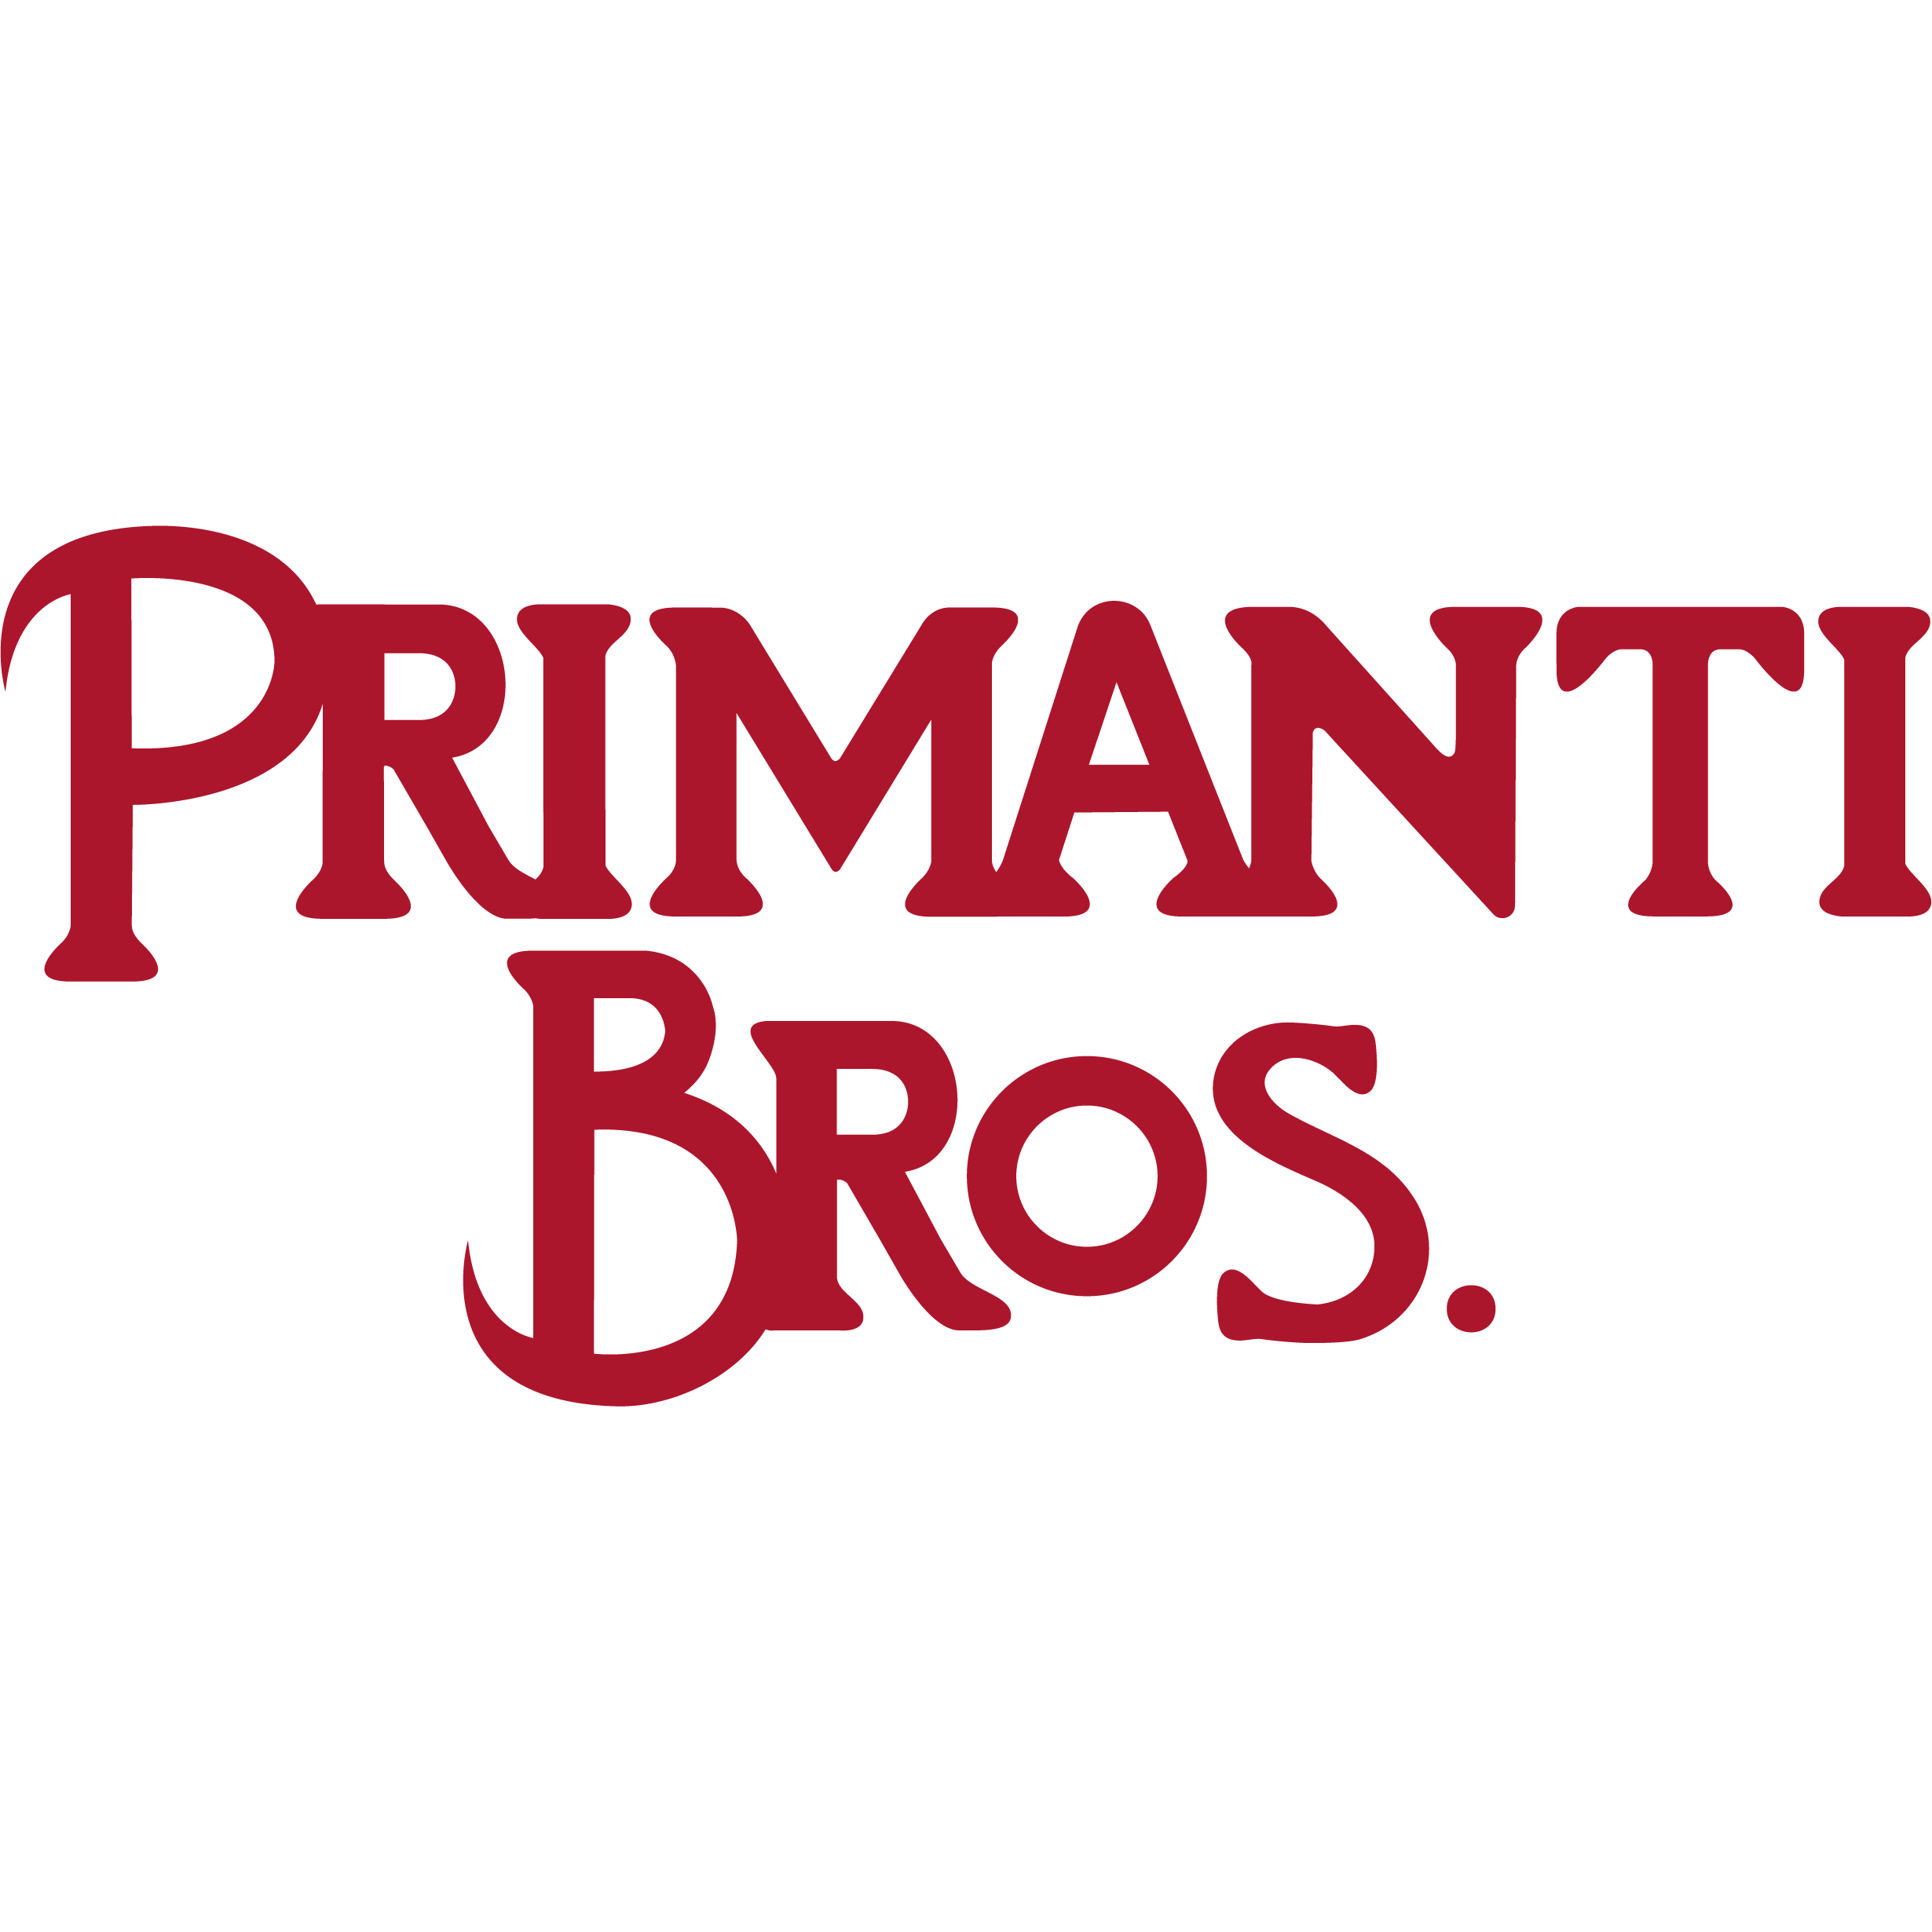 Primanti Bros. Restaurant and Bar - Pittsburgh, PA 15203 - (412)381-2583 | ShowMeLocal.com